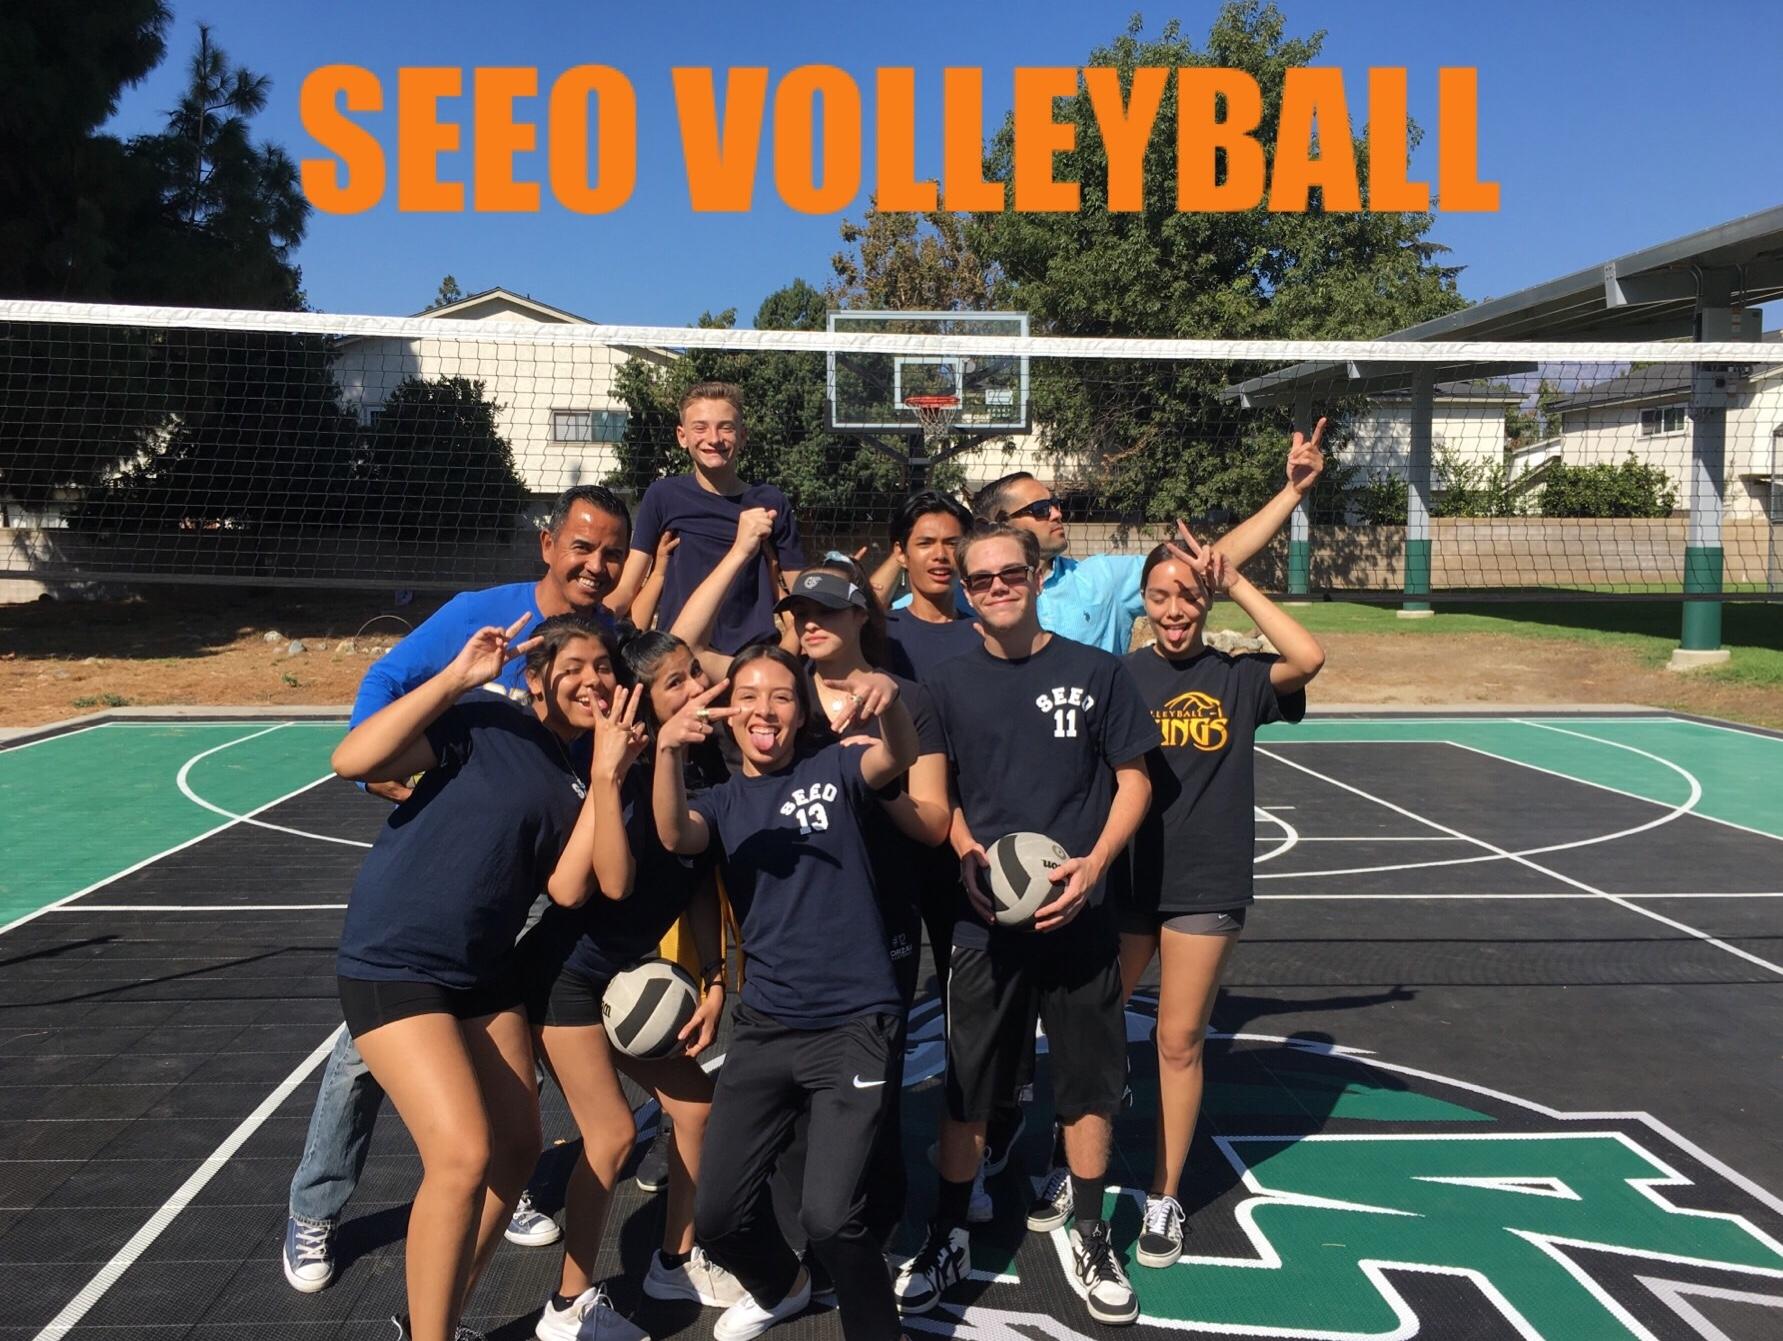 SEEO’s Volleyball Team